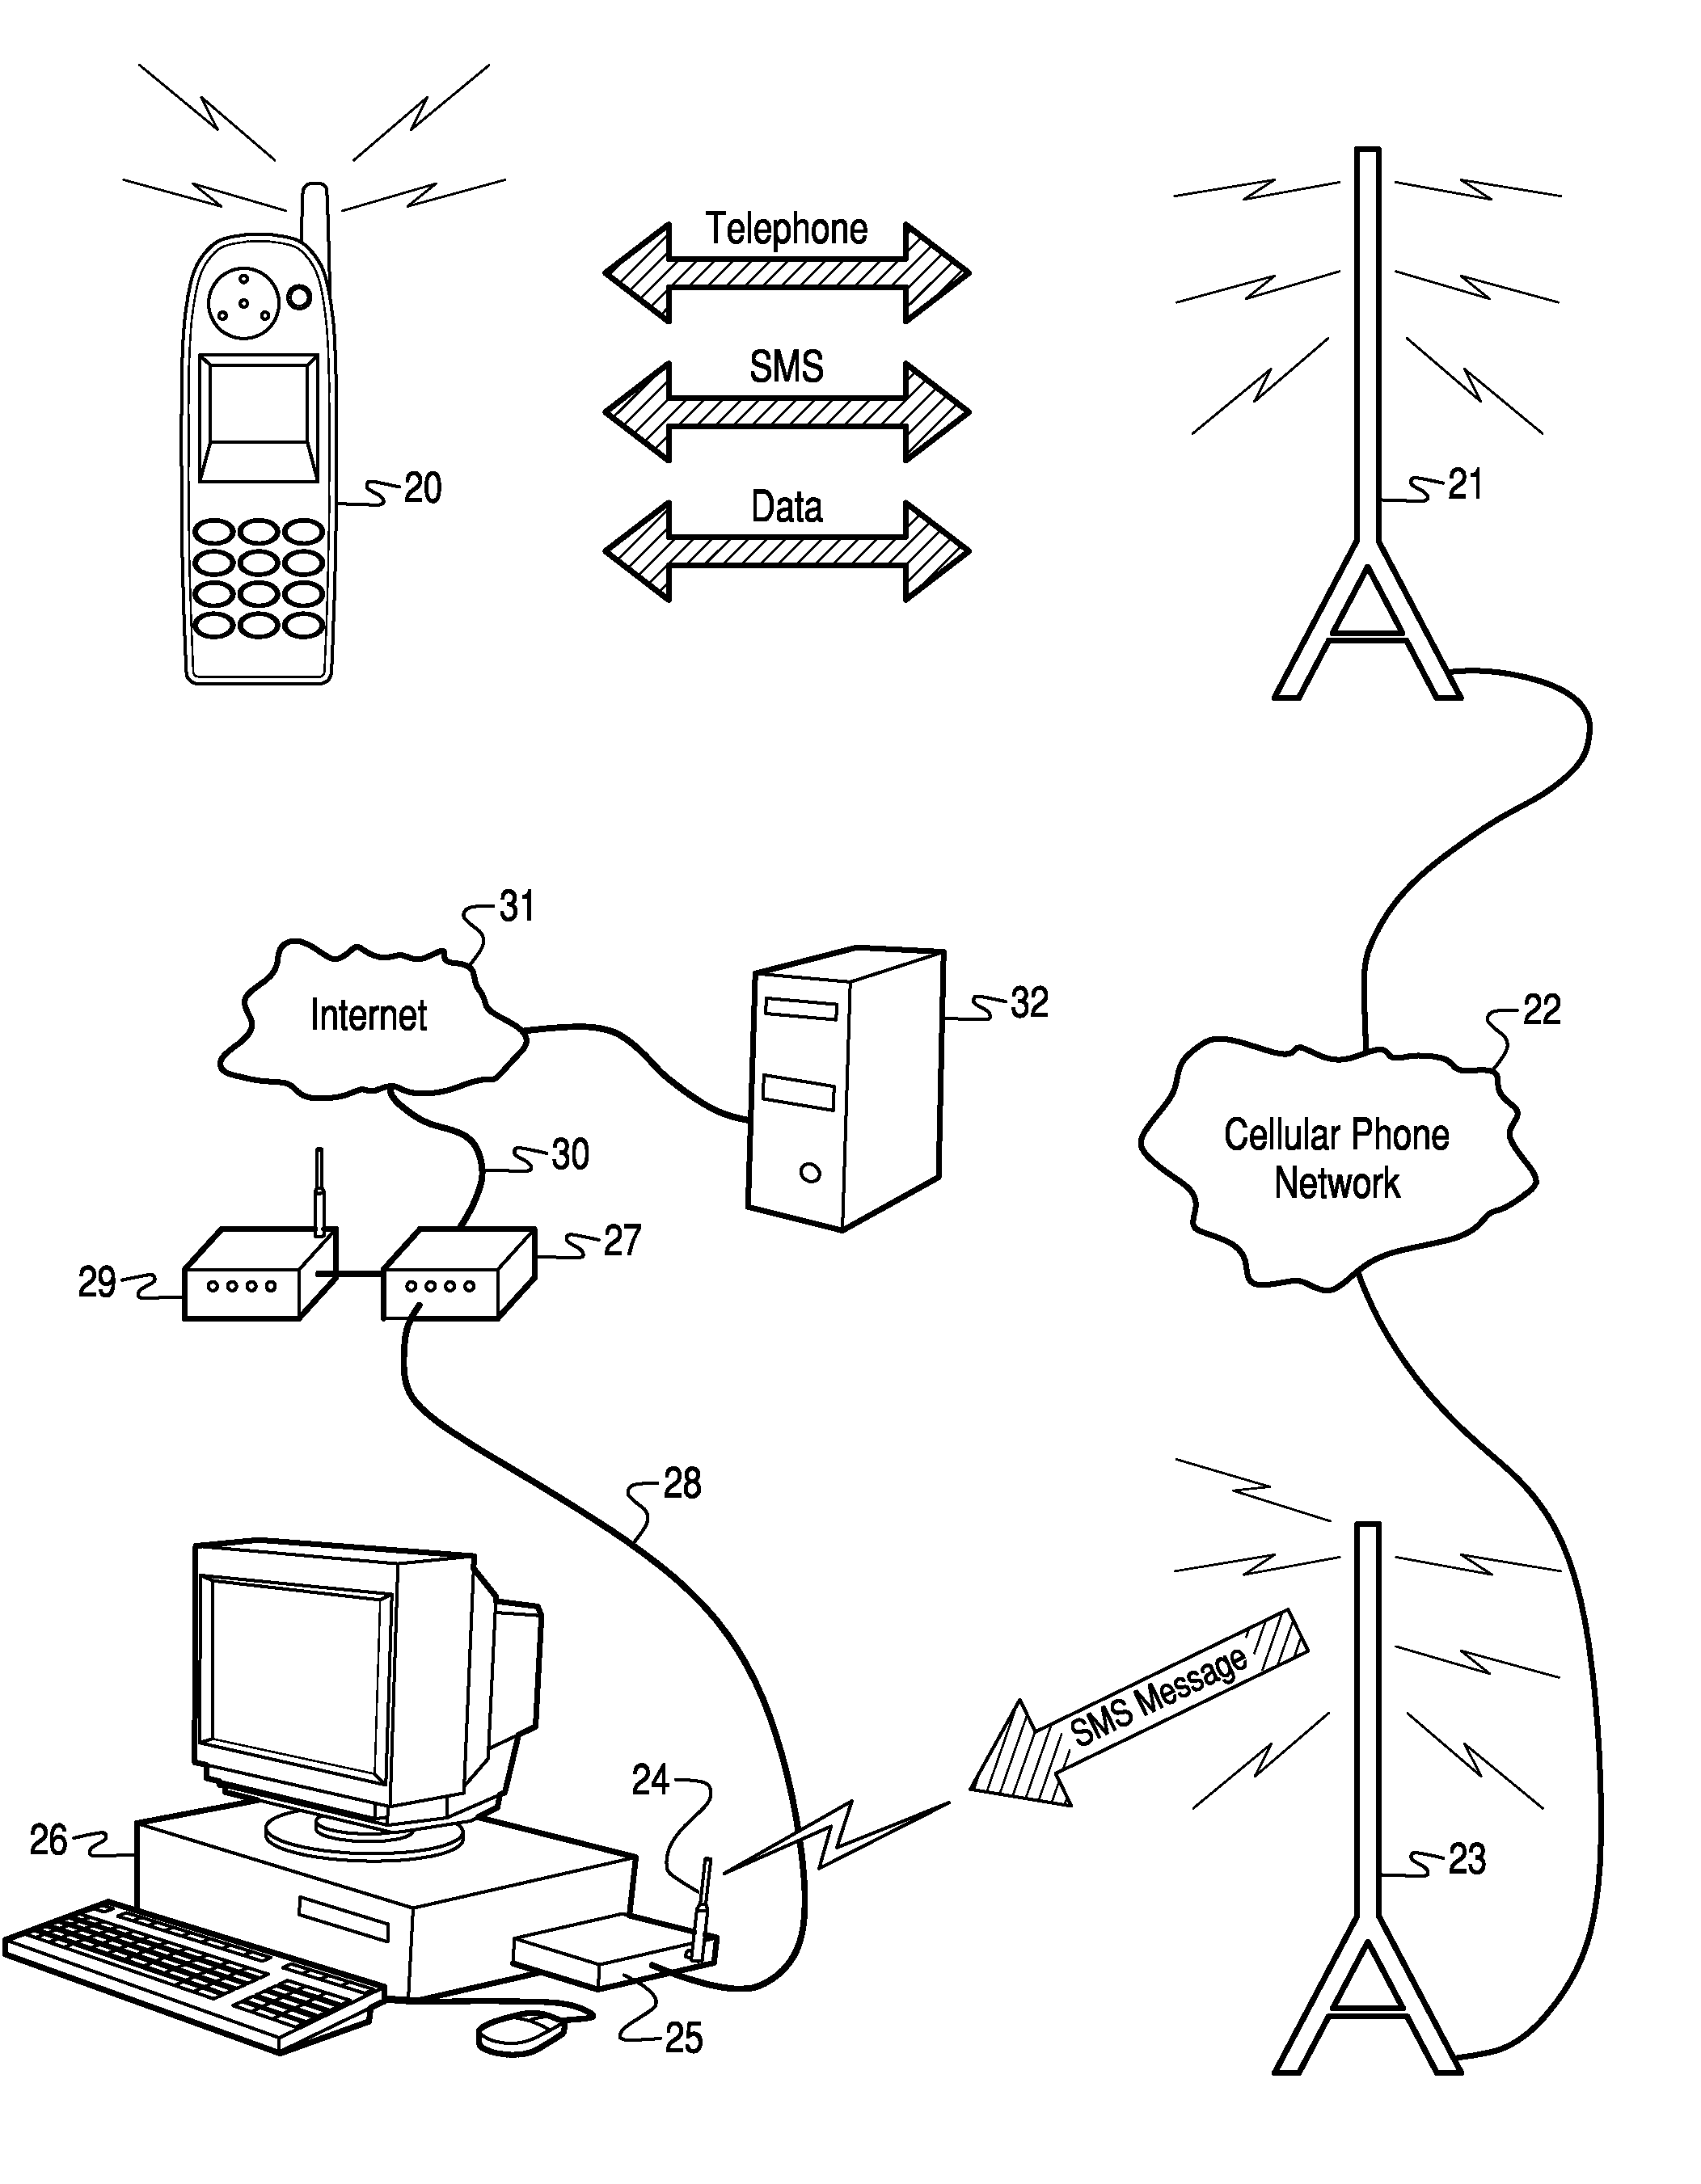 Apparatus and method for activating computer applications with SMS messaging